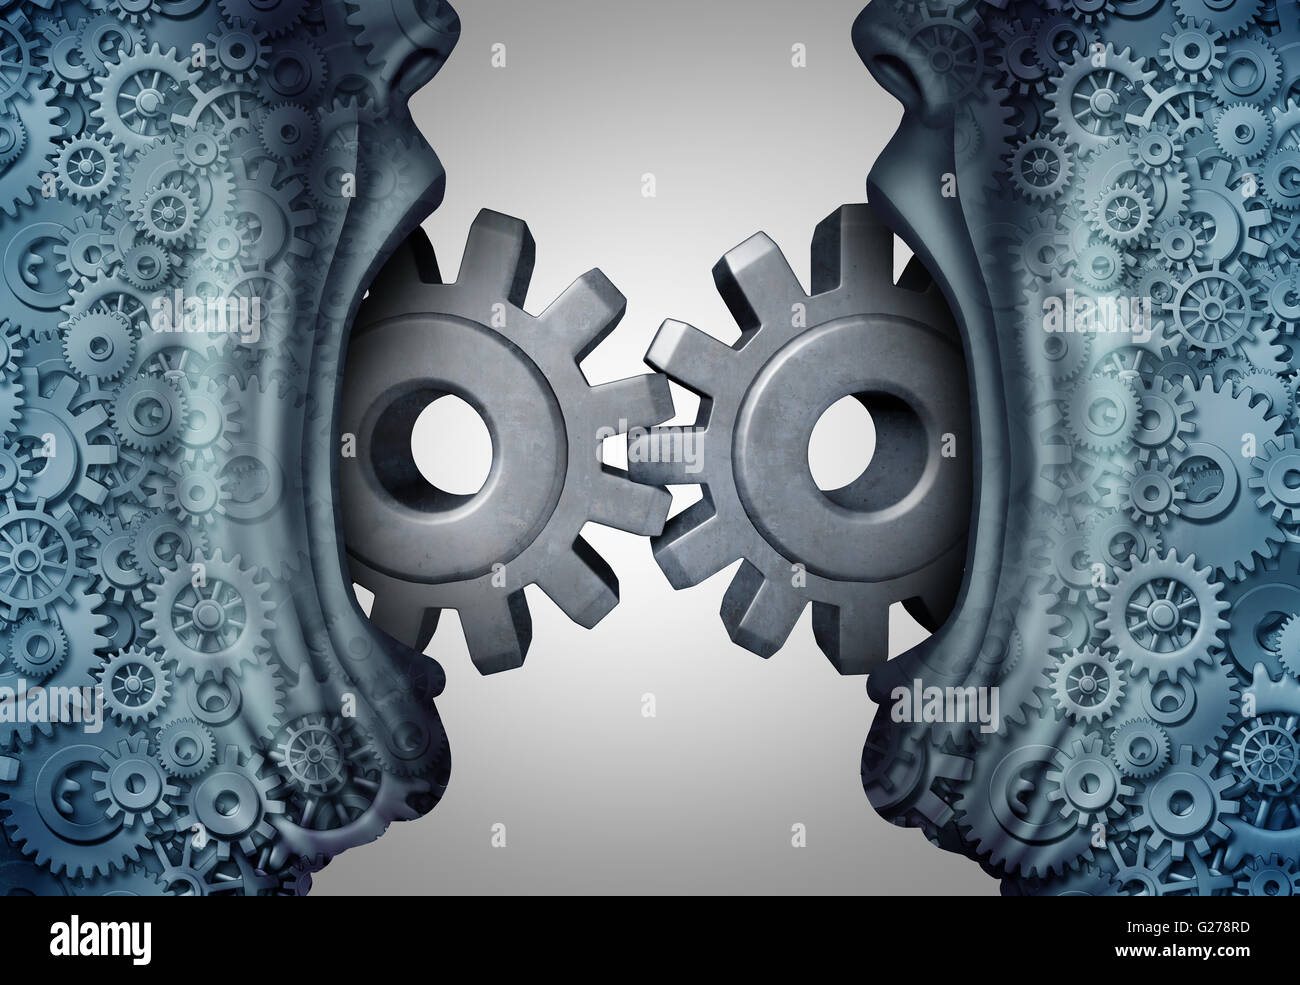 Concept of business communication and industry exchange symbol as two people with open mouths communicating connecting gears and cog wheels with 3D illustration elements. Stock Photo